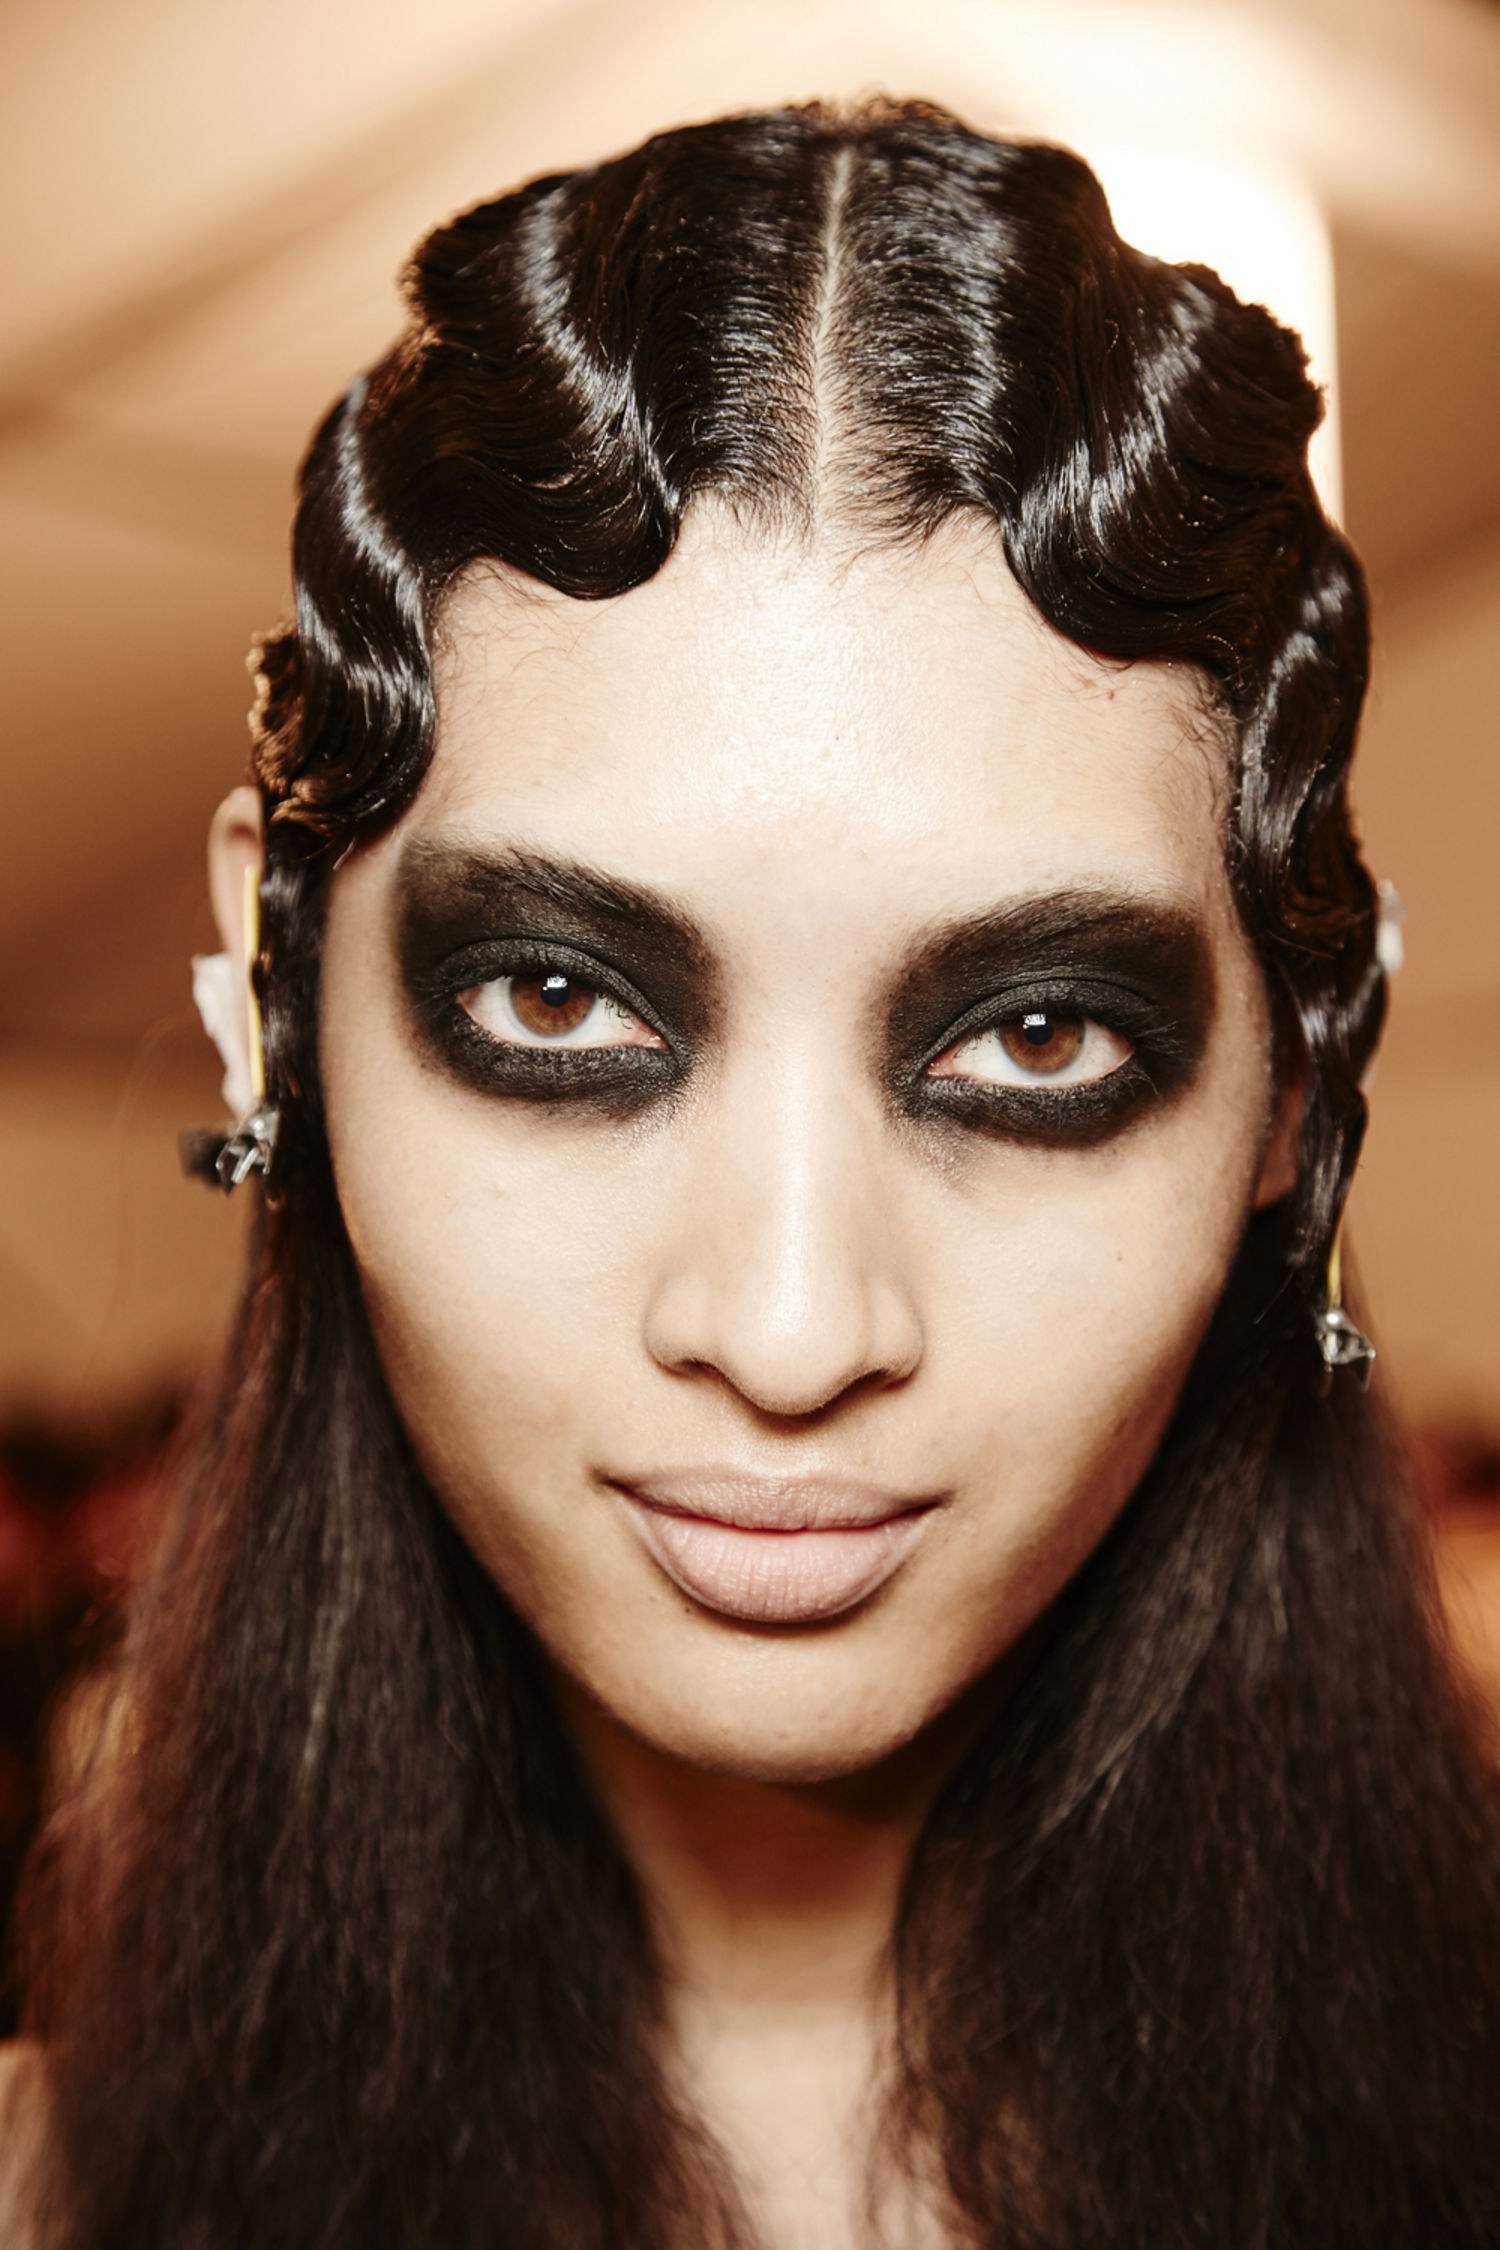 Goth Eye Makeup The Goth Makeup At Marc Jacobs Is Everything Even Kendall Jenner